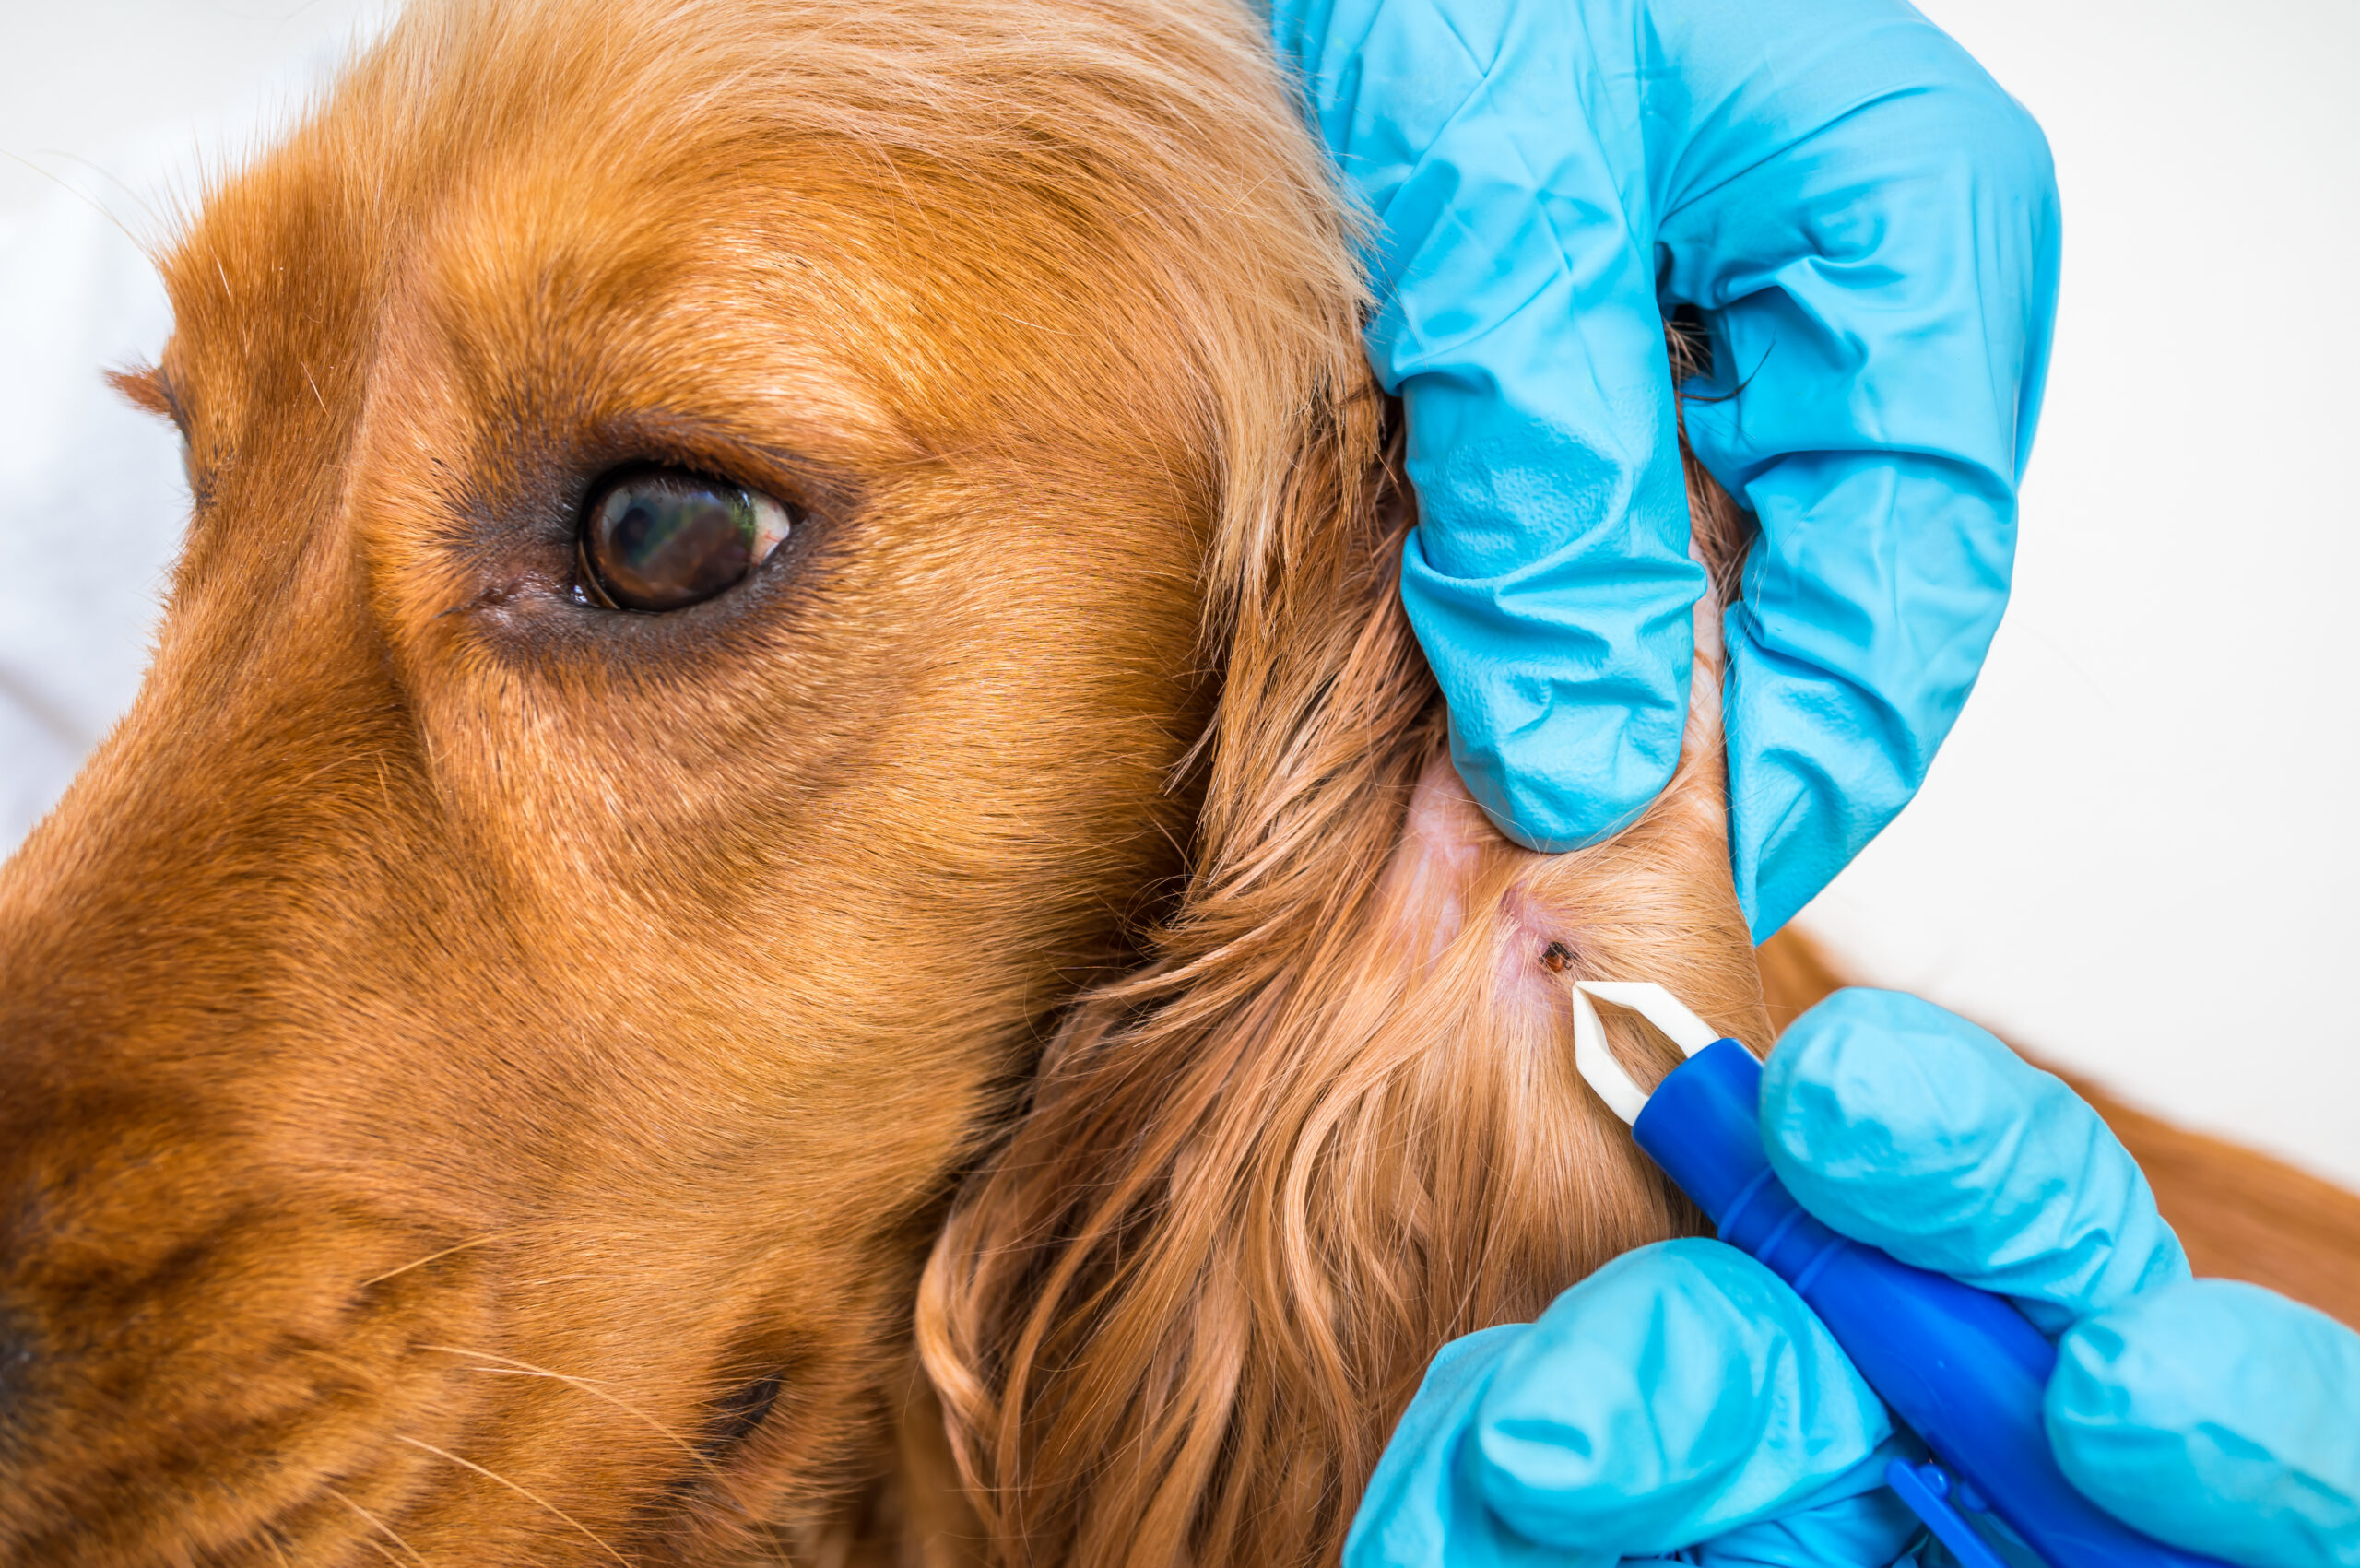 Veterinarian doctor removing a tick from the ear of a Cocker Spaniel